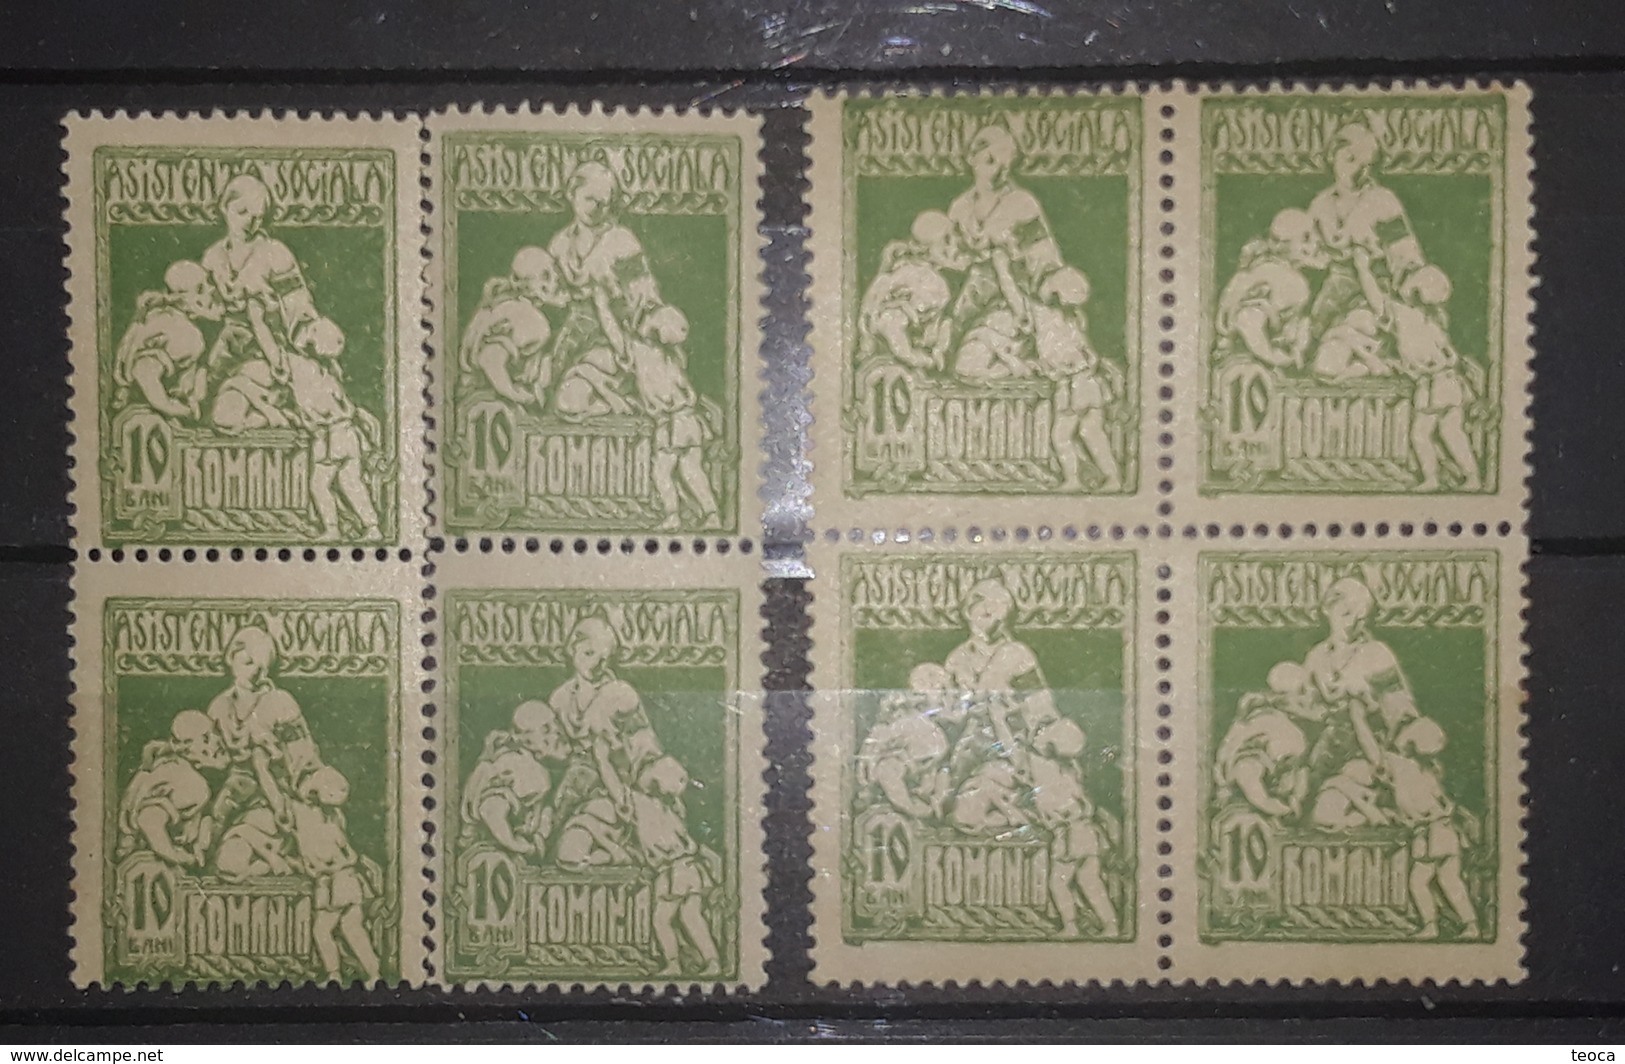 Romania1921, Revenue Stamps, Social Assistance, BF X4, MNH,ERROR  MISPLACED IMAGE PERFORATION, BF X4 AND 2 PAAR X2 - Ungebraucht